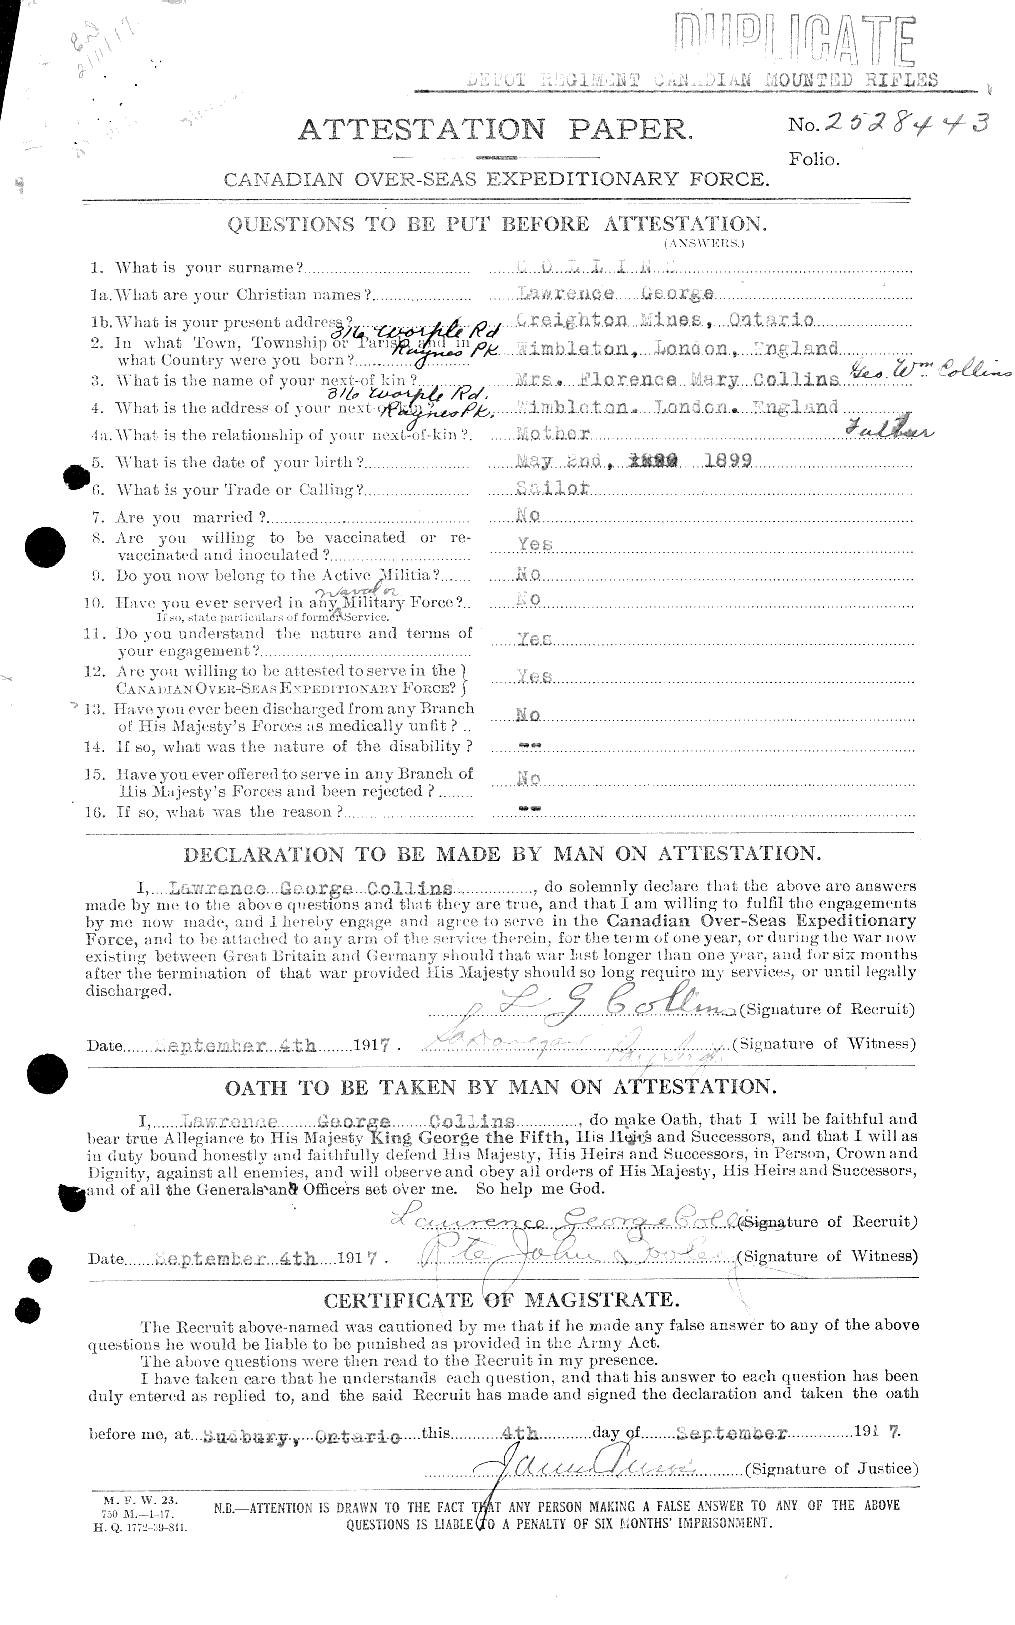 Personnel Records of the First World War - CEF 034437a